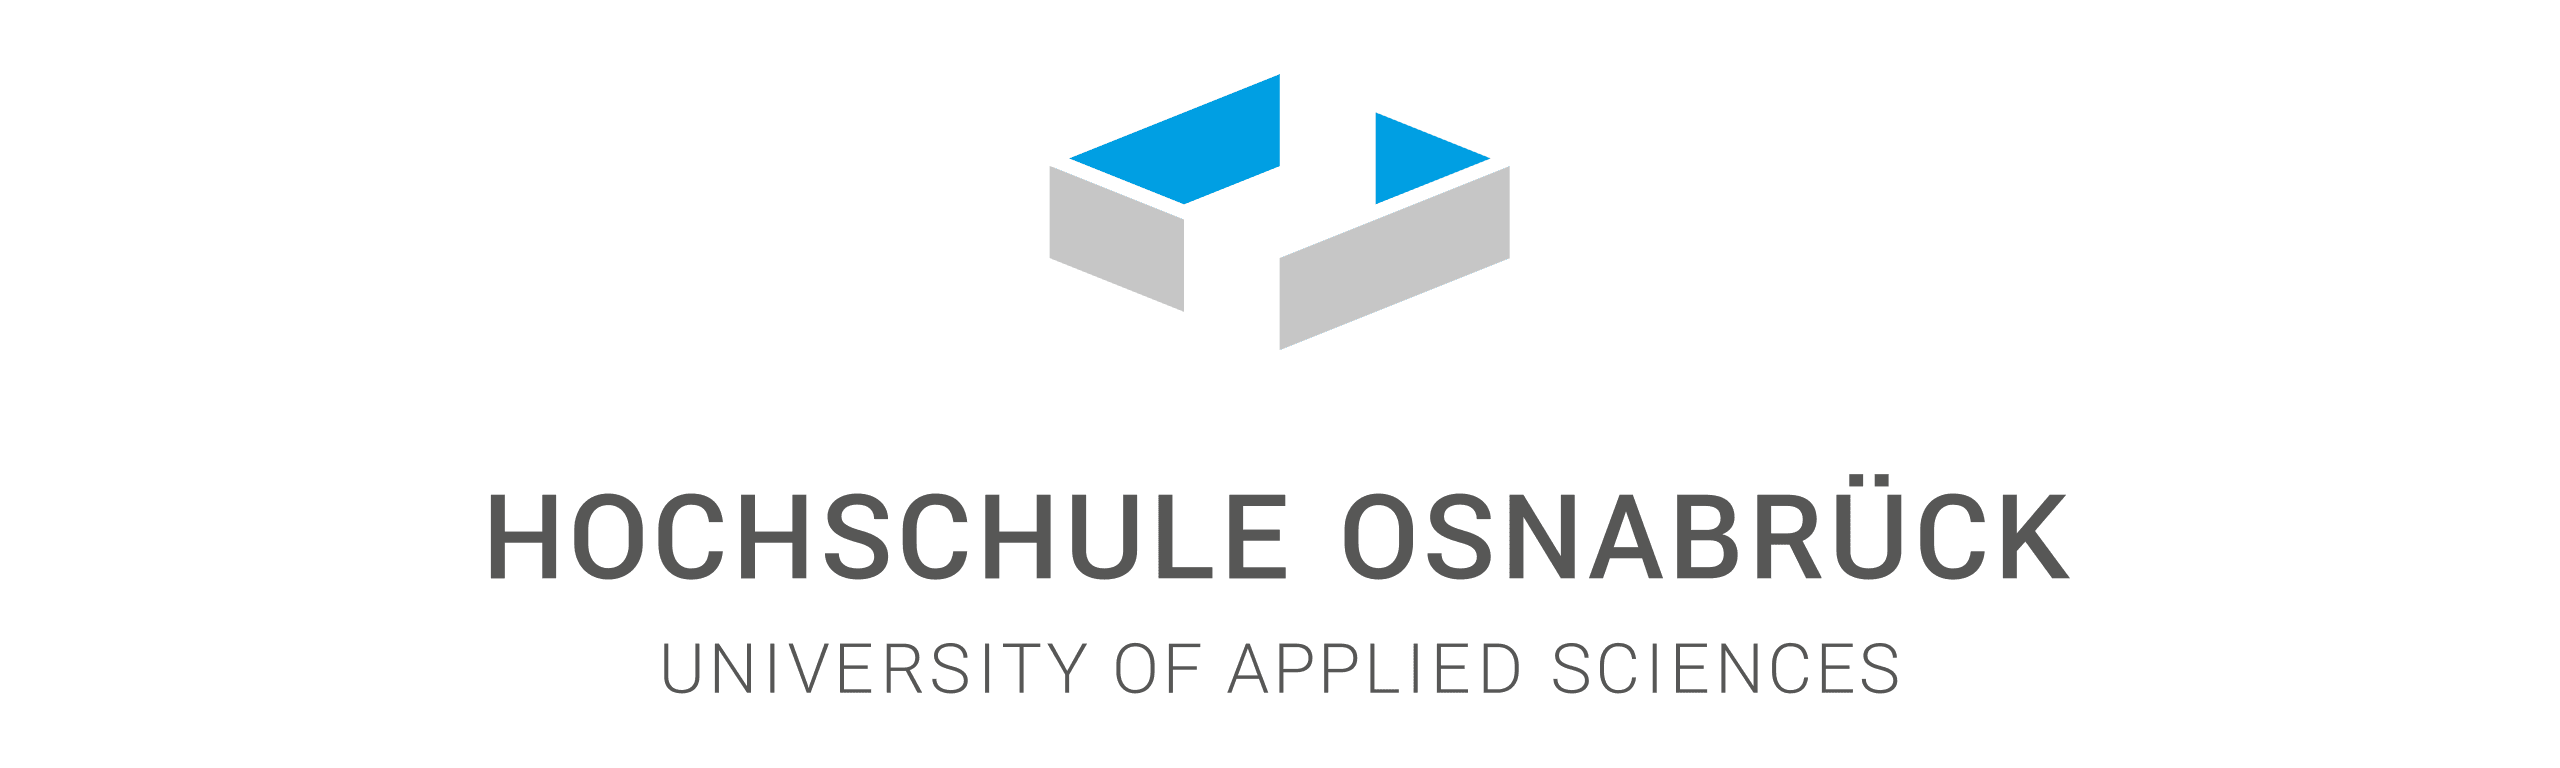 osnabruck-university-of-applied-sciences-a1205da07d-cover-picture